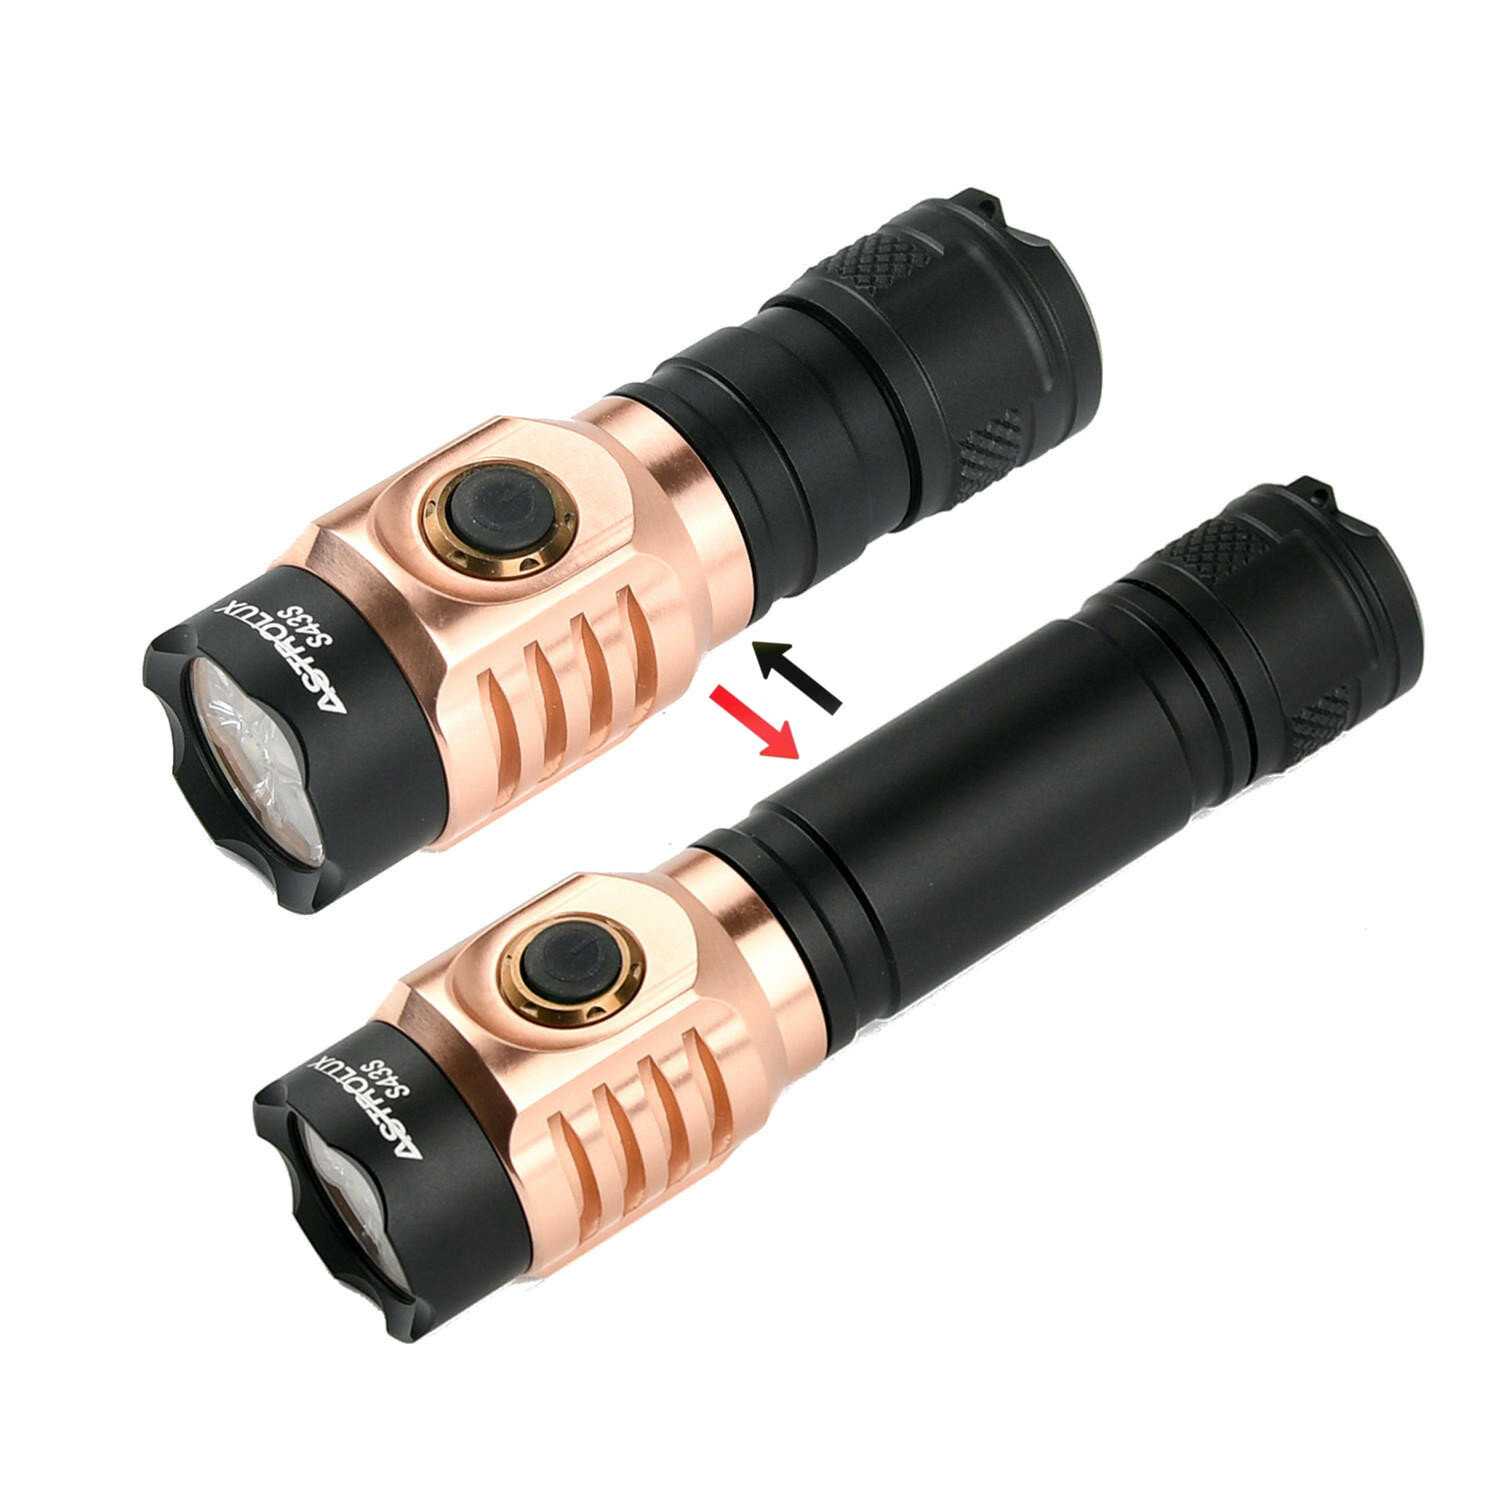 best price,astrolux,s43s,copper,lh351d,flashlight,coupon,price,discount